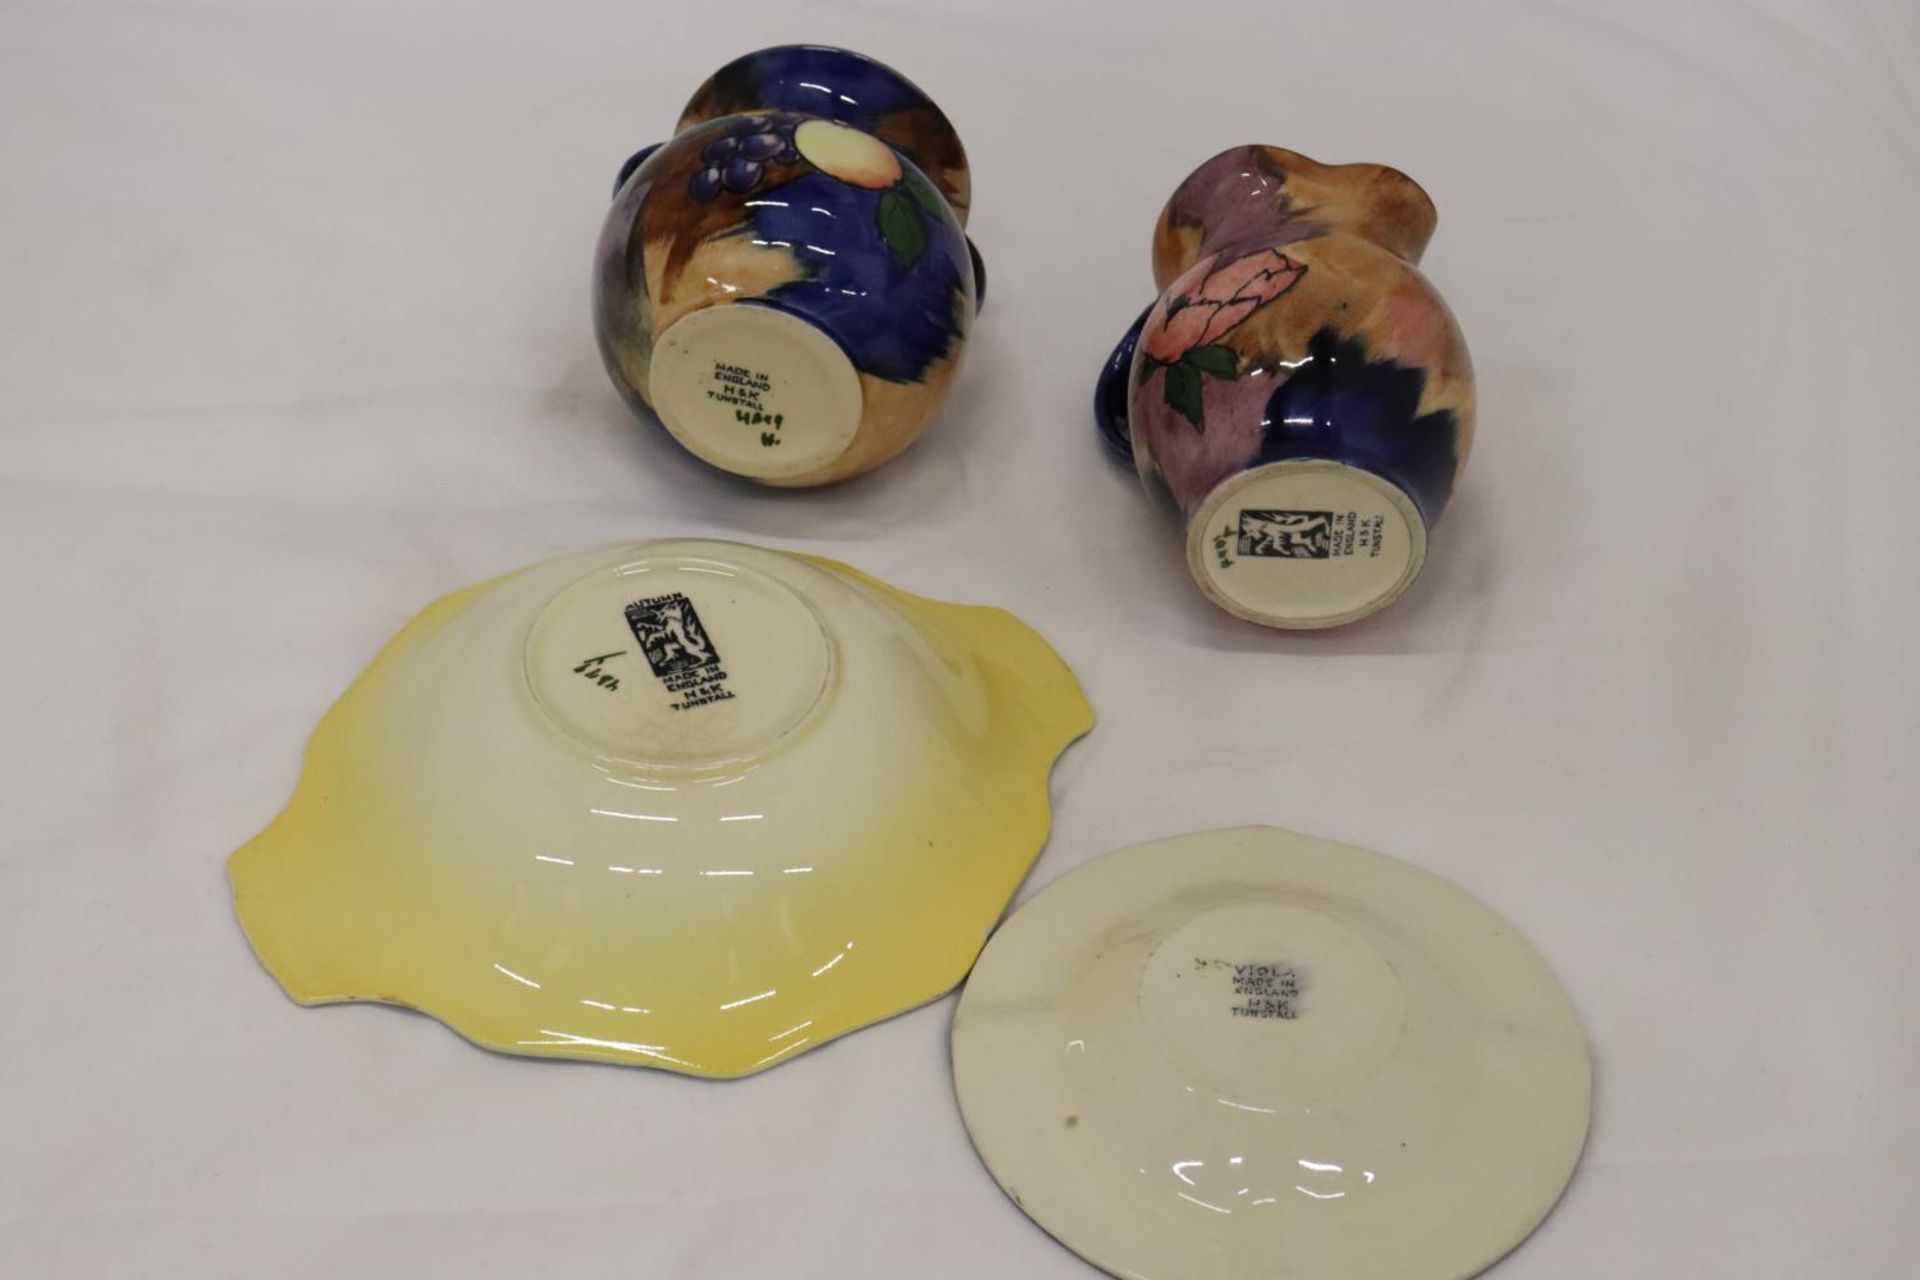 FOUR PIECES OF H & K TUNSTALL POTTERY, TO INCLUDE A BOWL, PLATE, JUG AND BOWL - Image 5 of 6